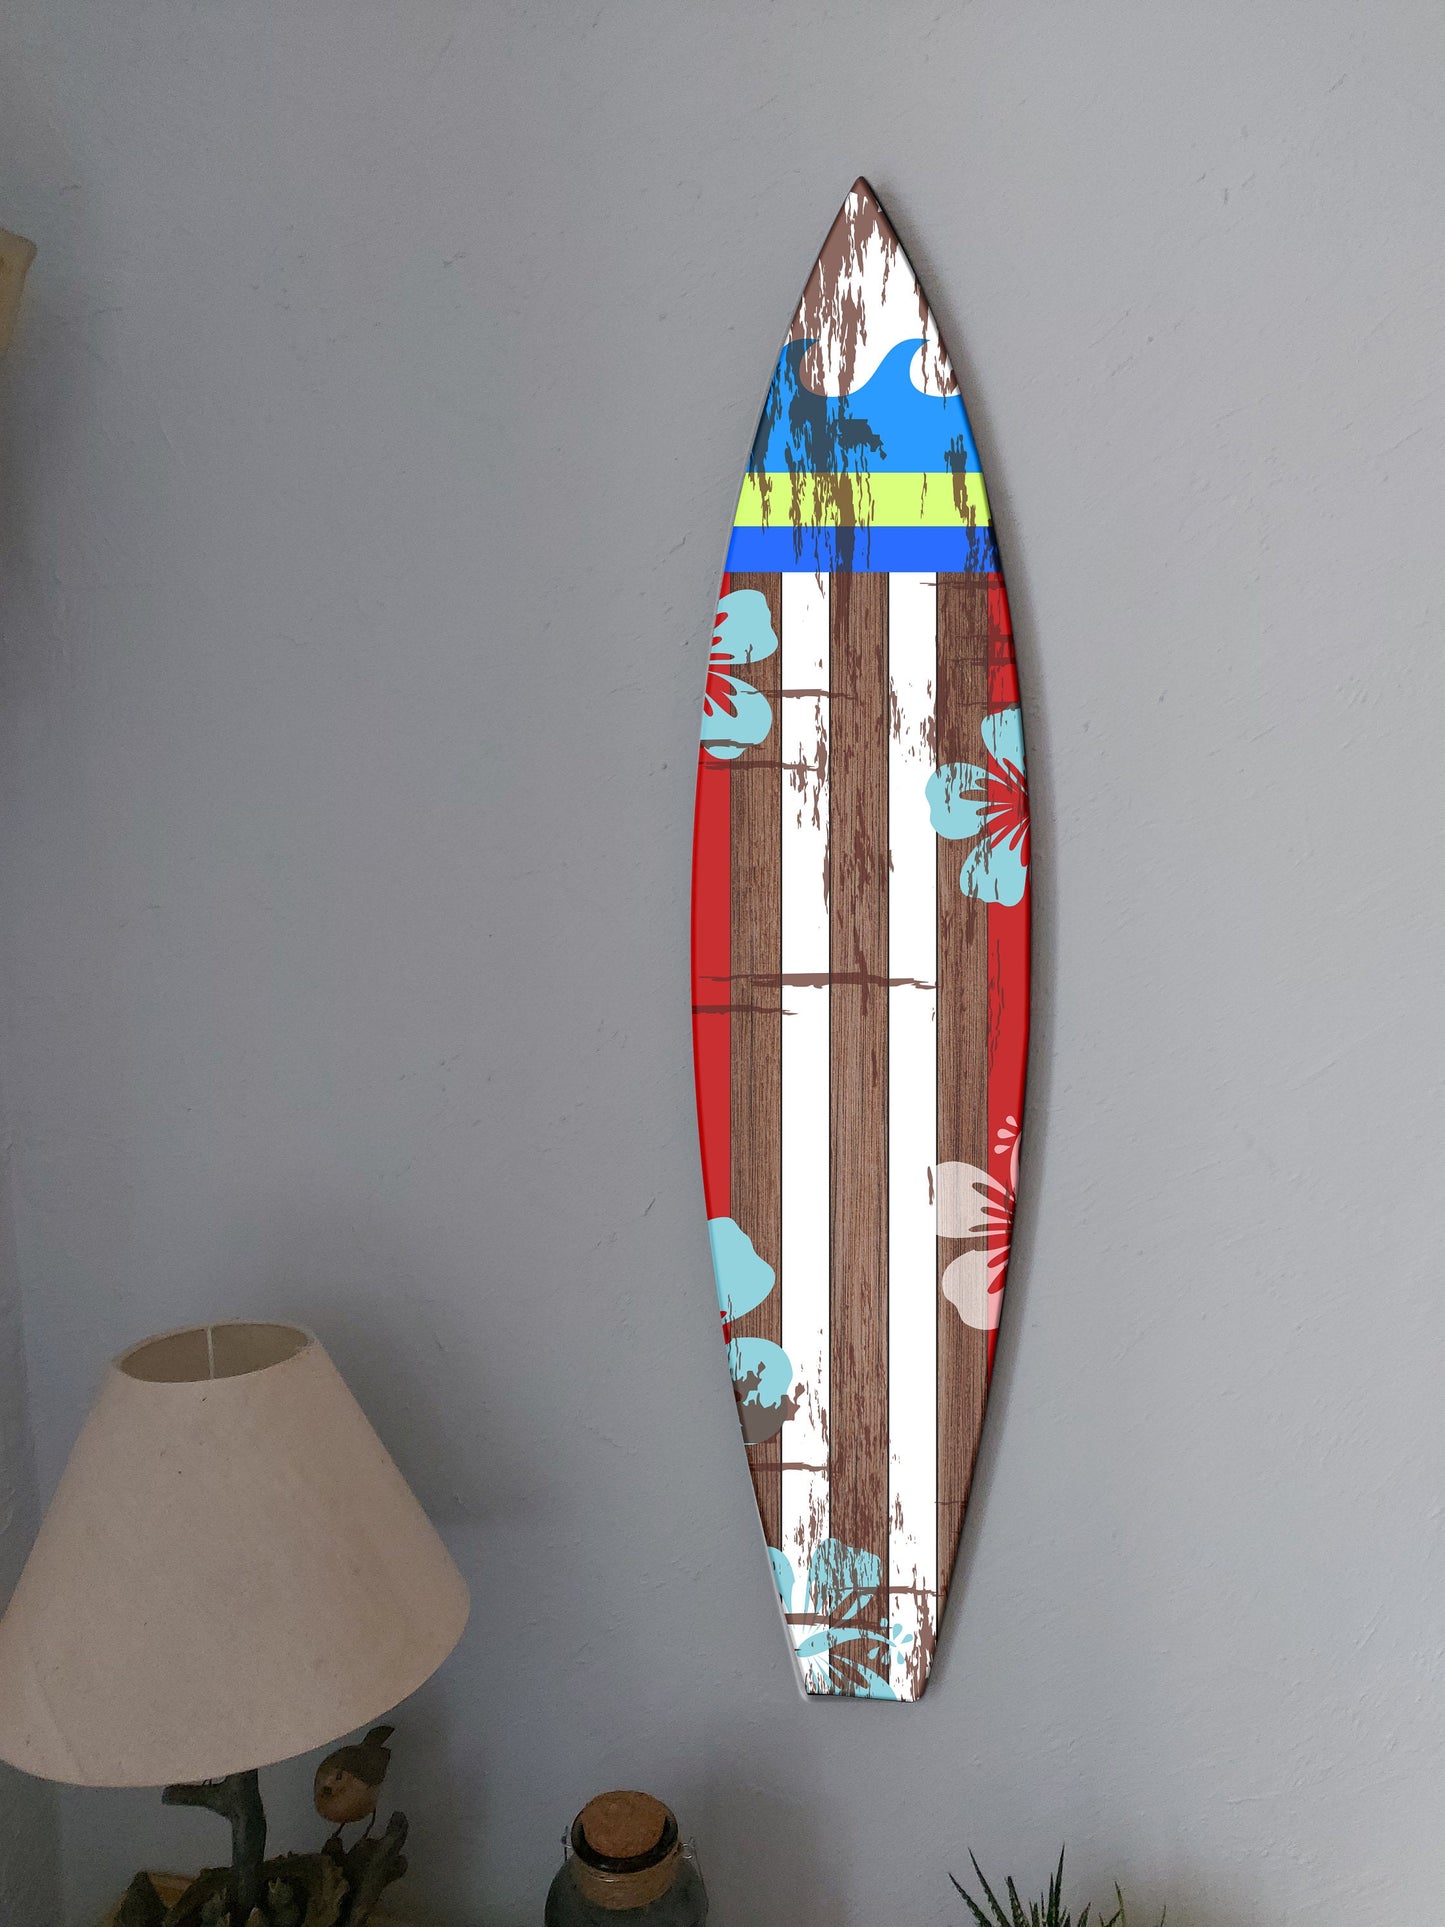 Decorative Wall Surfboard Sign: Surfing Inspired Vintage Wall Hanging in Blue, Brown, White, and Red